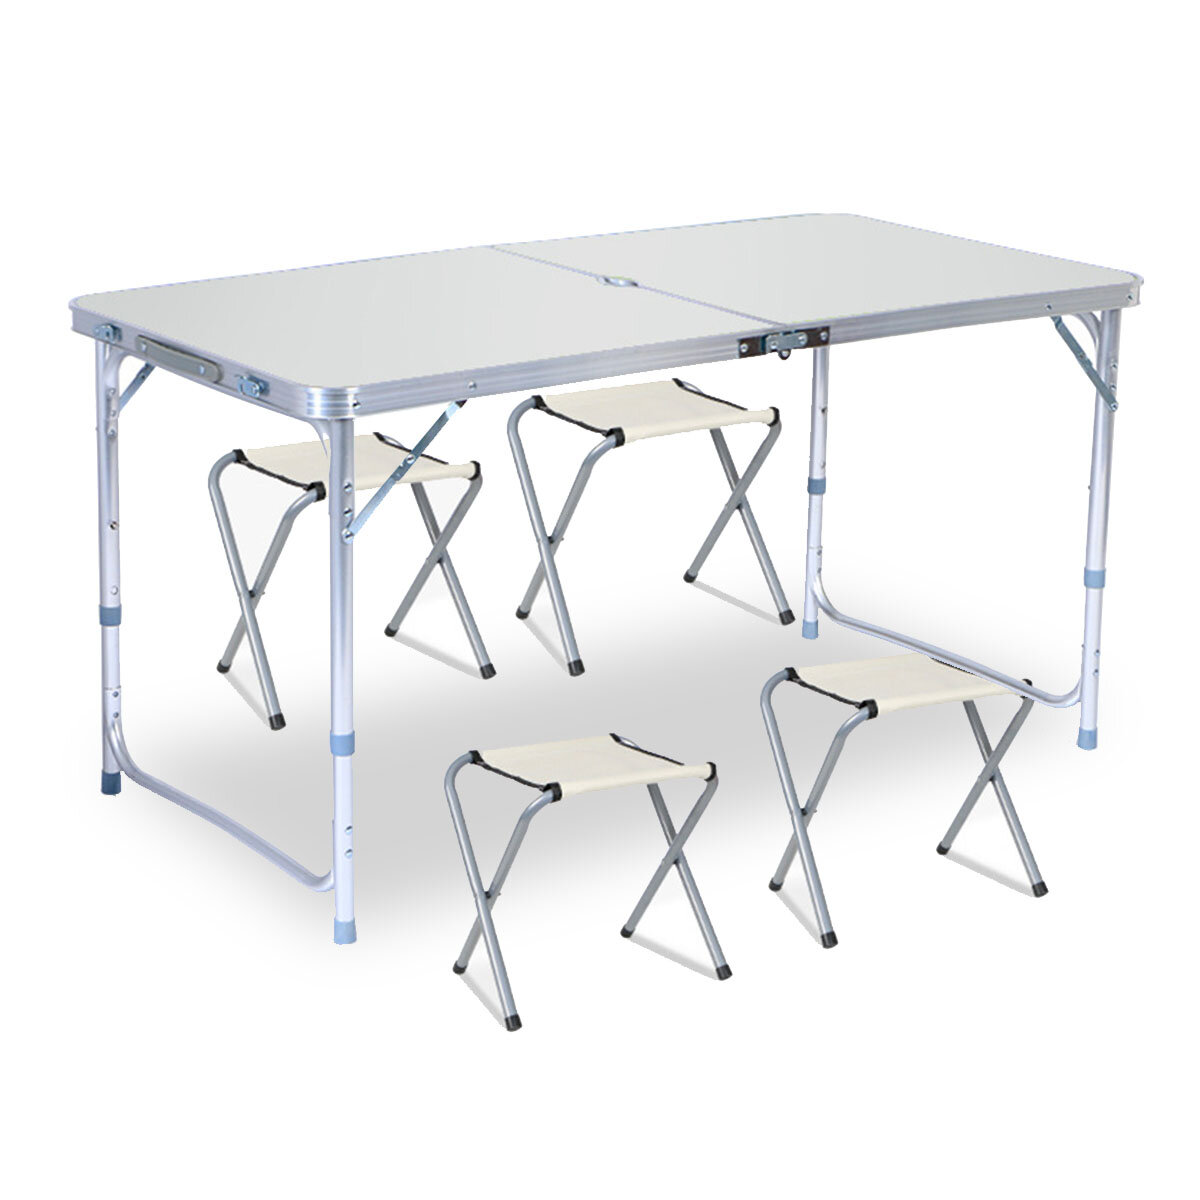 120x60cm Portable Aluminum Alloy Folding Table Chair Height Adjustable Indoor Outdoor BBQ Camping Picnic Table Kit